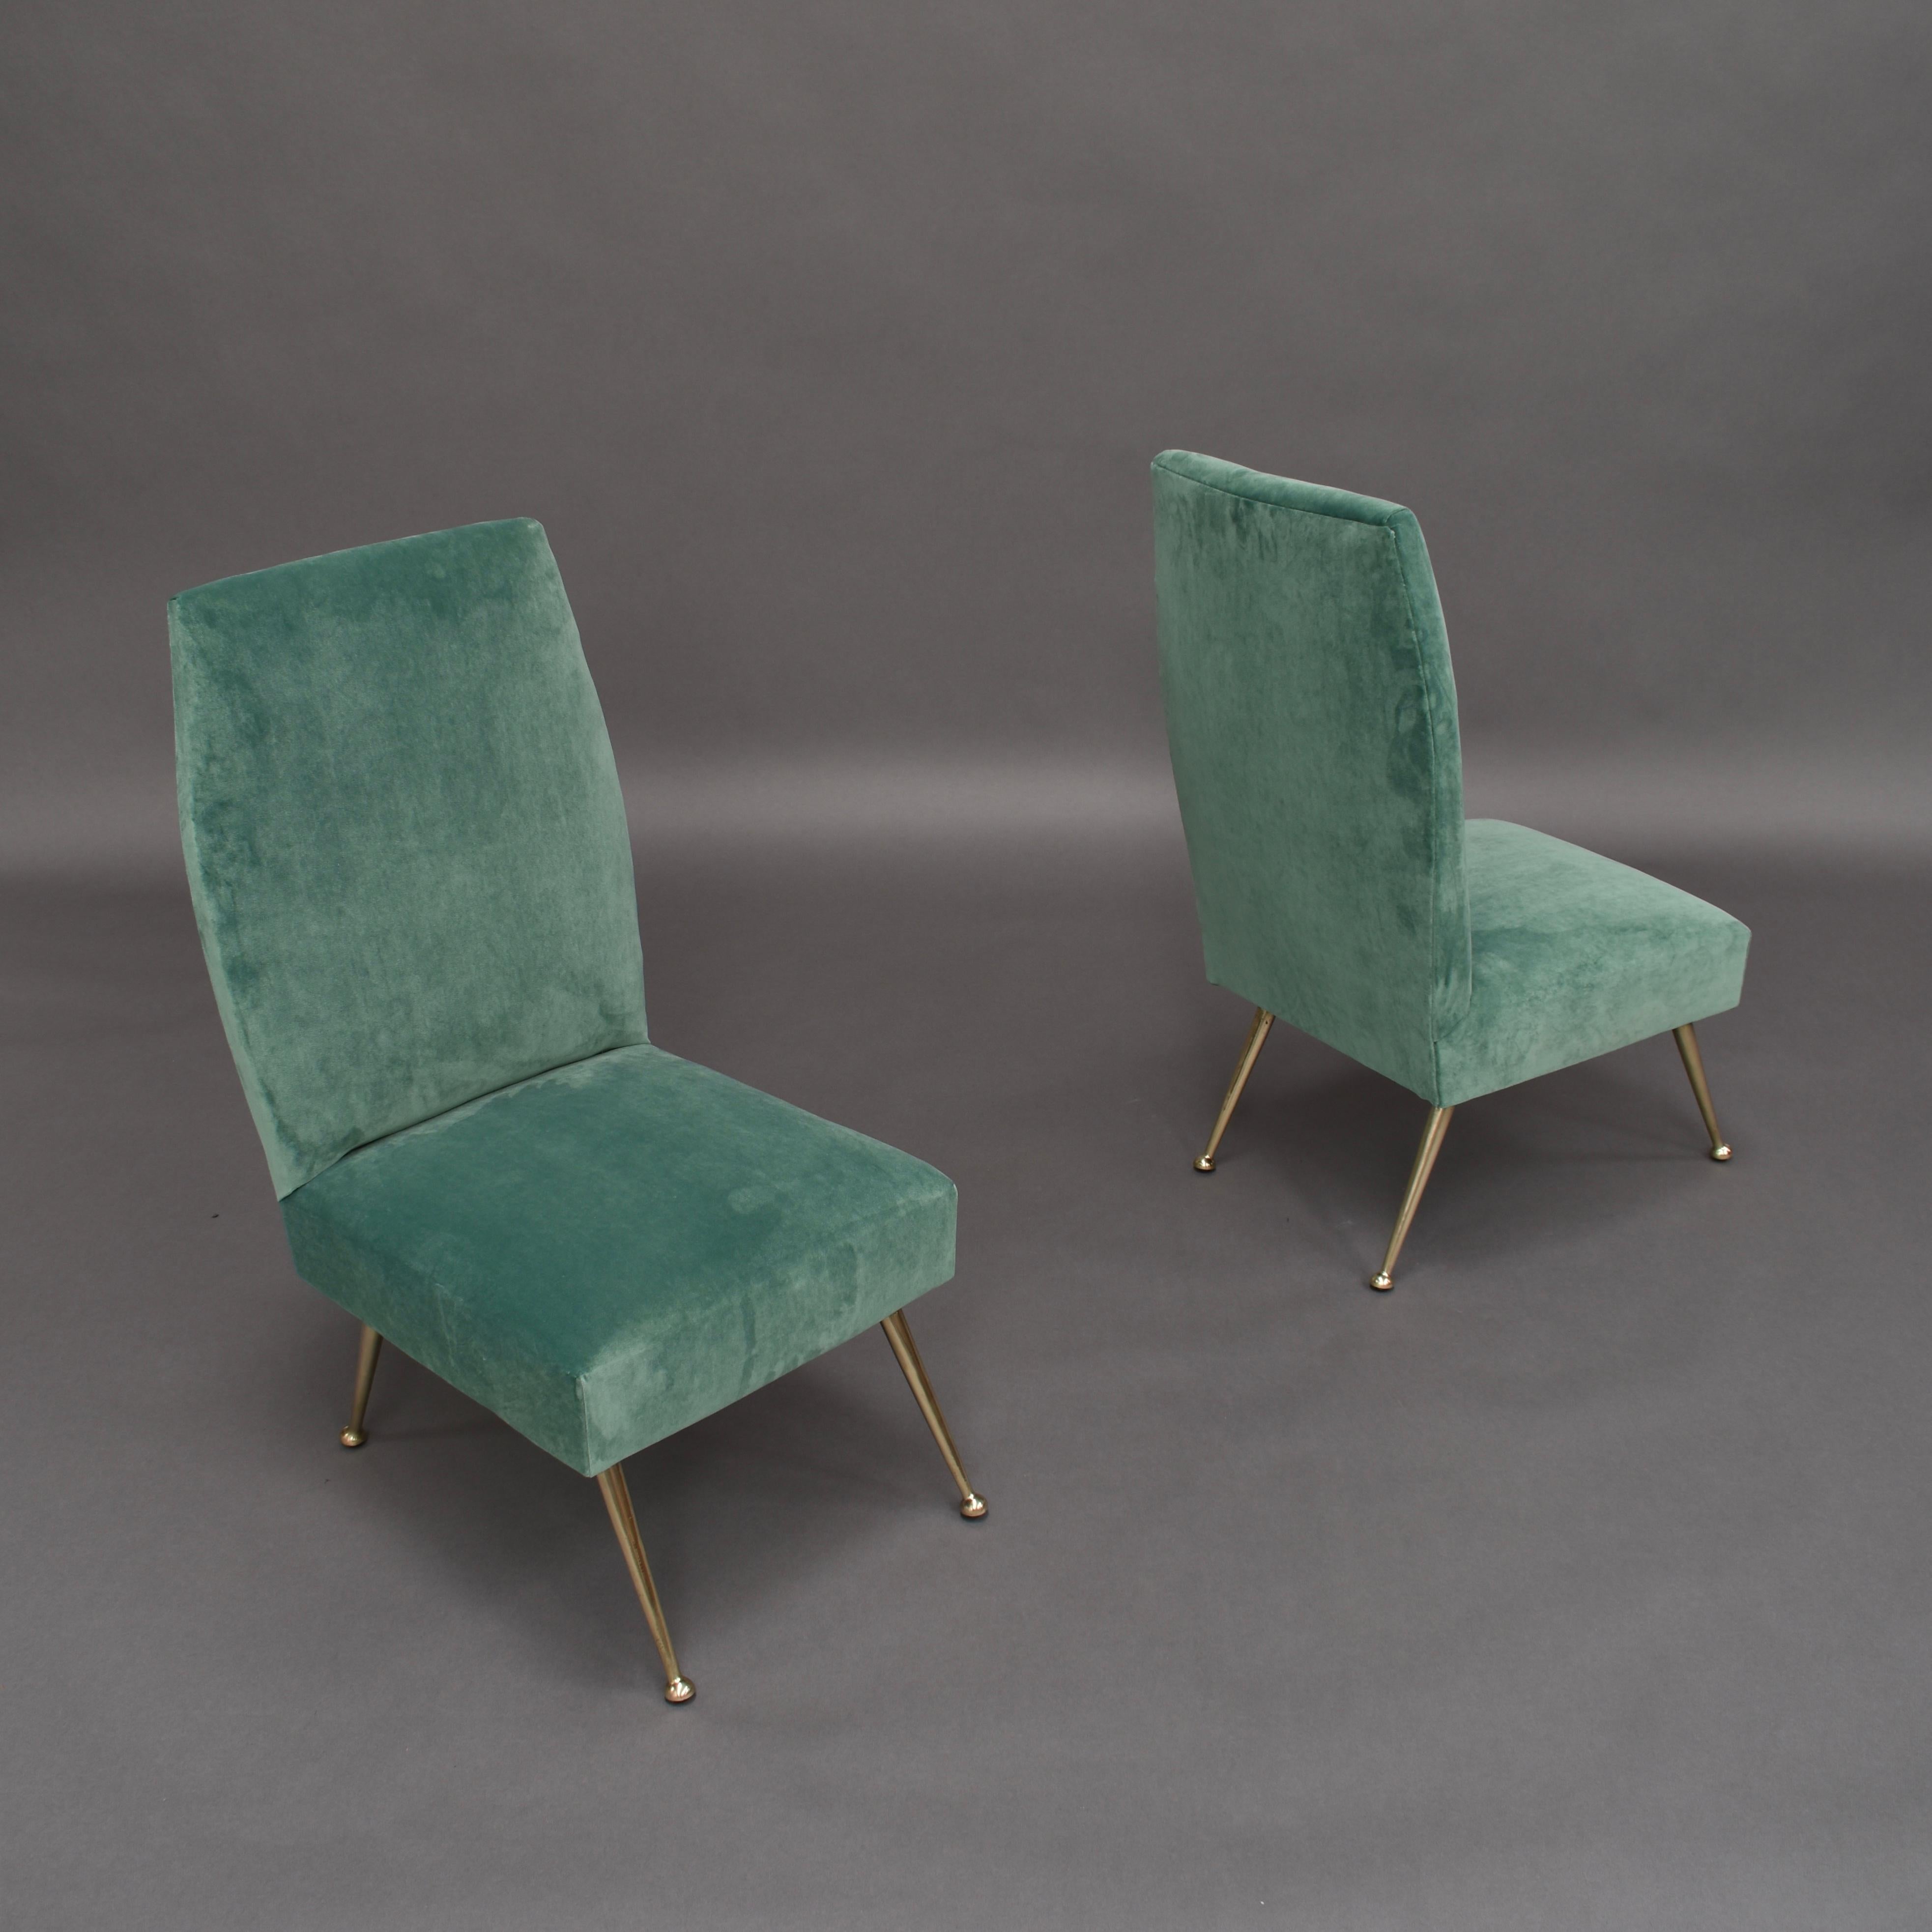 Italian Gigi Radice Elegant and Trendy Pair of Side Chairs for Minotti, Italy, 1950s For Sale